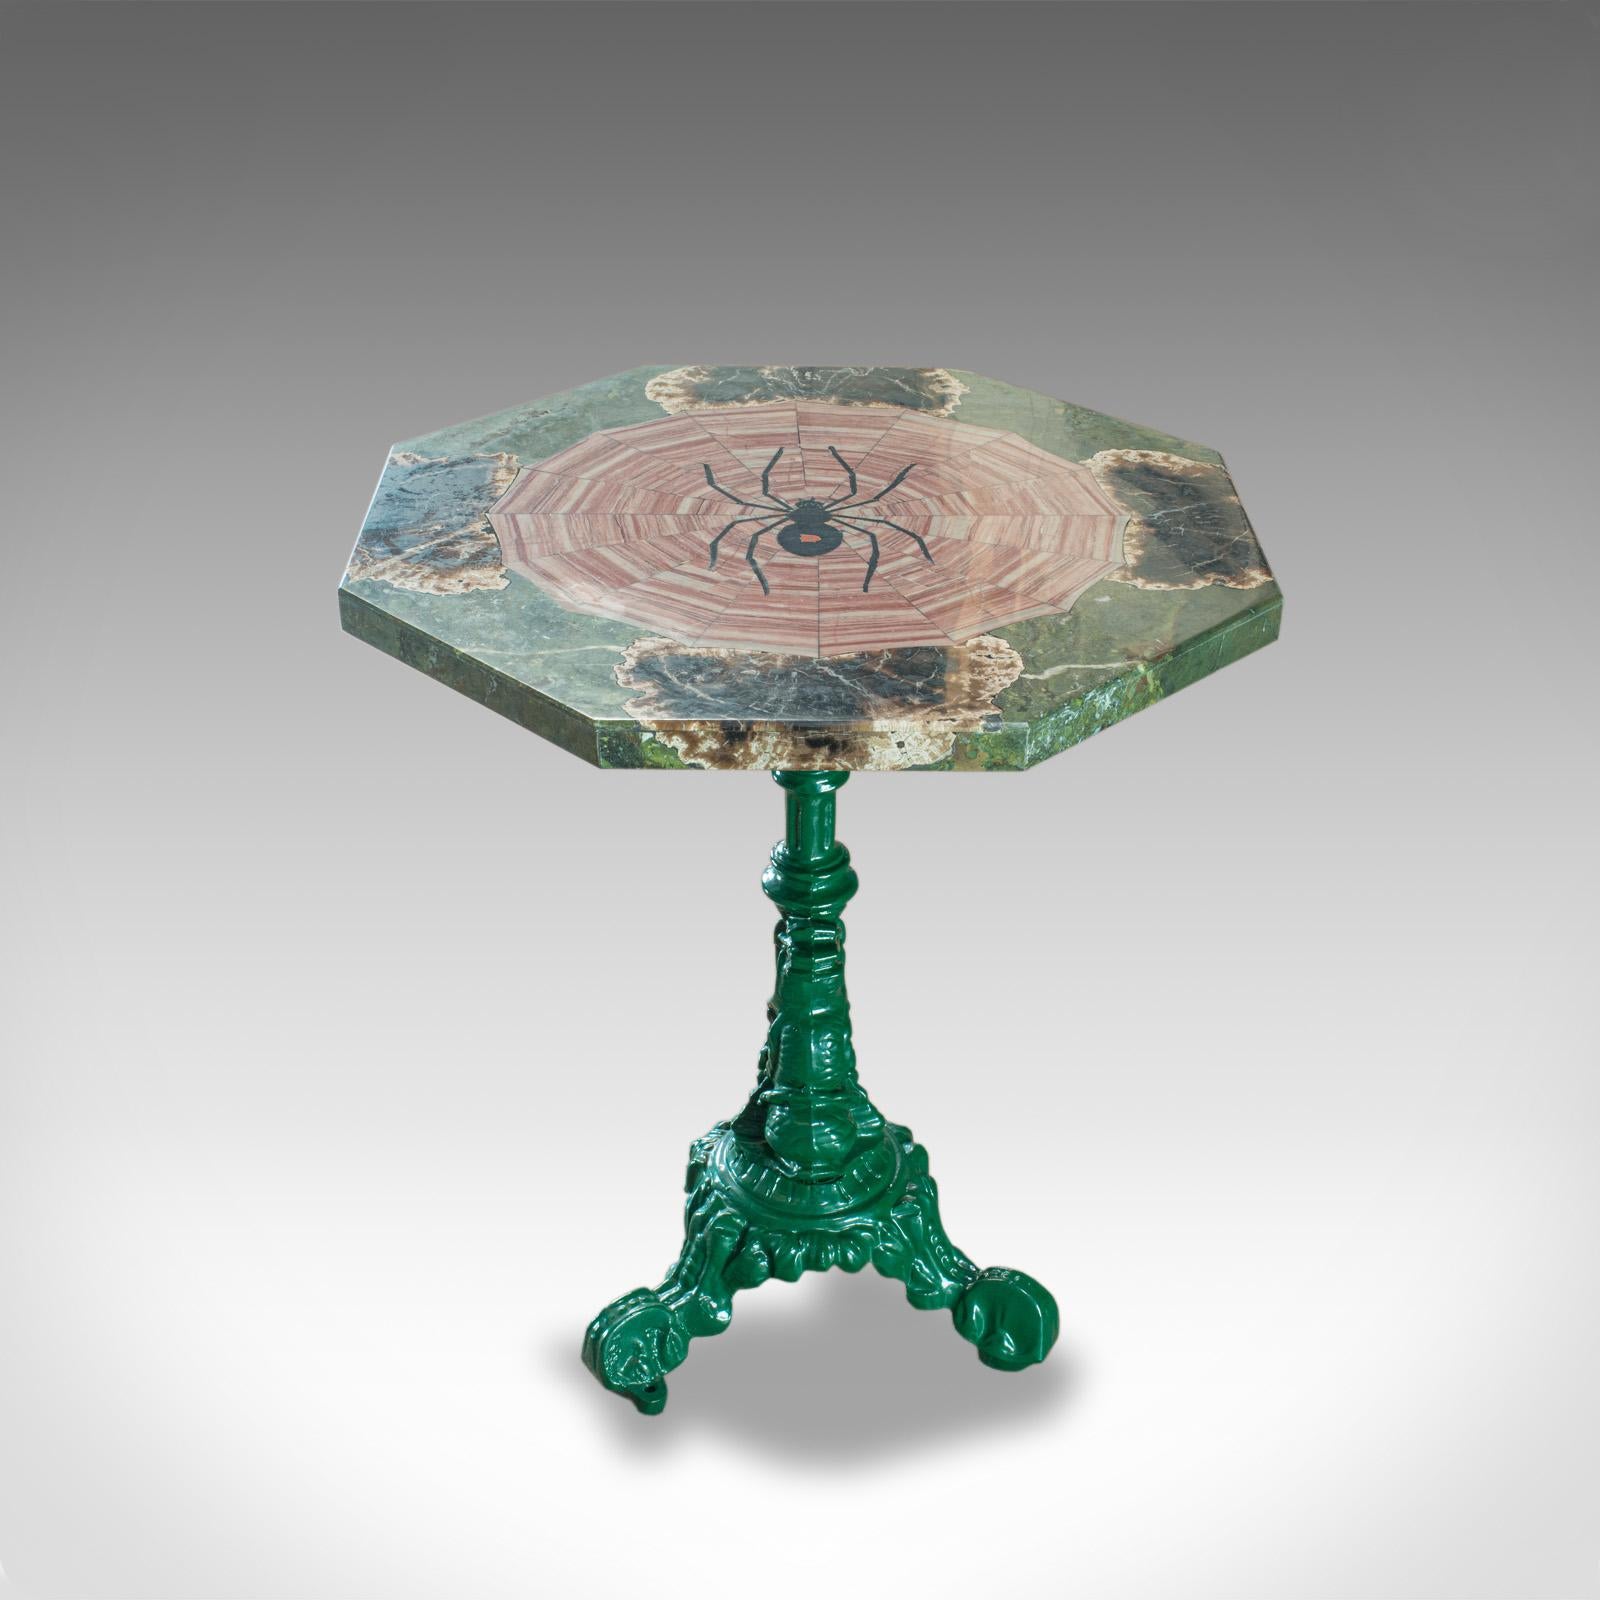 20th Century Petrified Spider Table, English, Marble, Pietra Dura, Cast Iron, Dominic Hurley